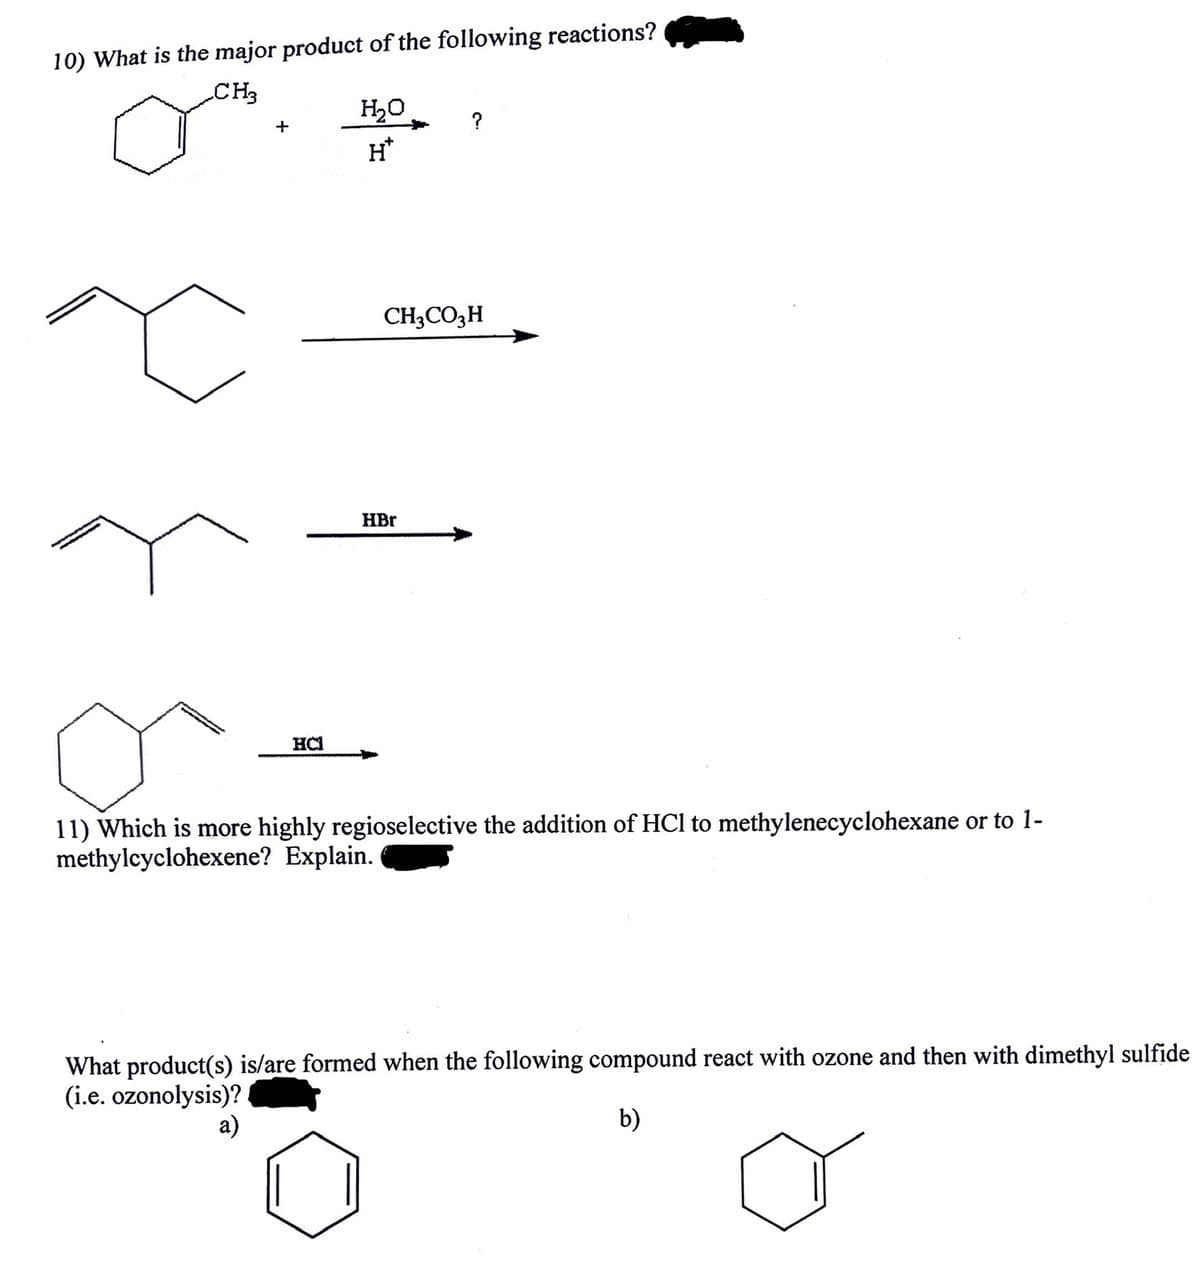 10) What is the major product of the following reactions?
CH3
+
HCI
H₂O
H*
?
CH3CO3 H
HBr
11) Which is more highly regioselective the addition of HCl to methylenecyclohexane or to 1-
methylcyclohexene? Explain.
What product(s) is/are formed when the following compound react with ozone and then with dimethyl sulfide
(i.e. ozonolysis)?
a)
b)